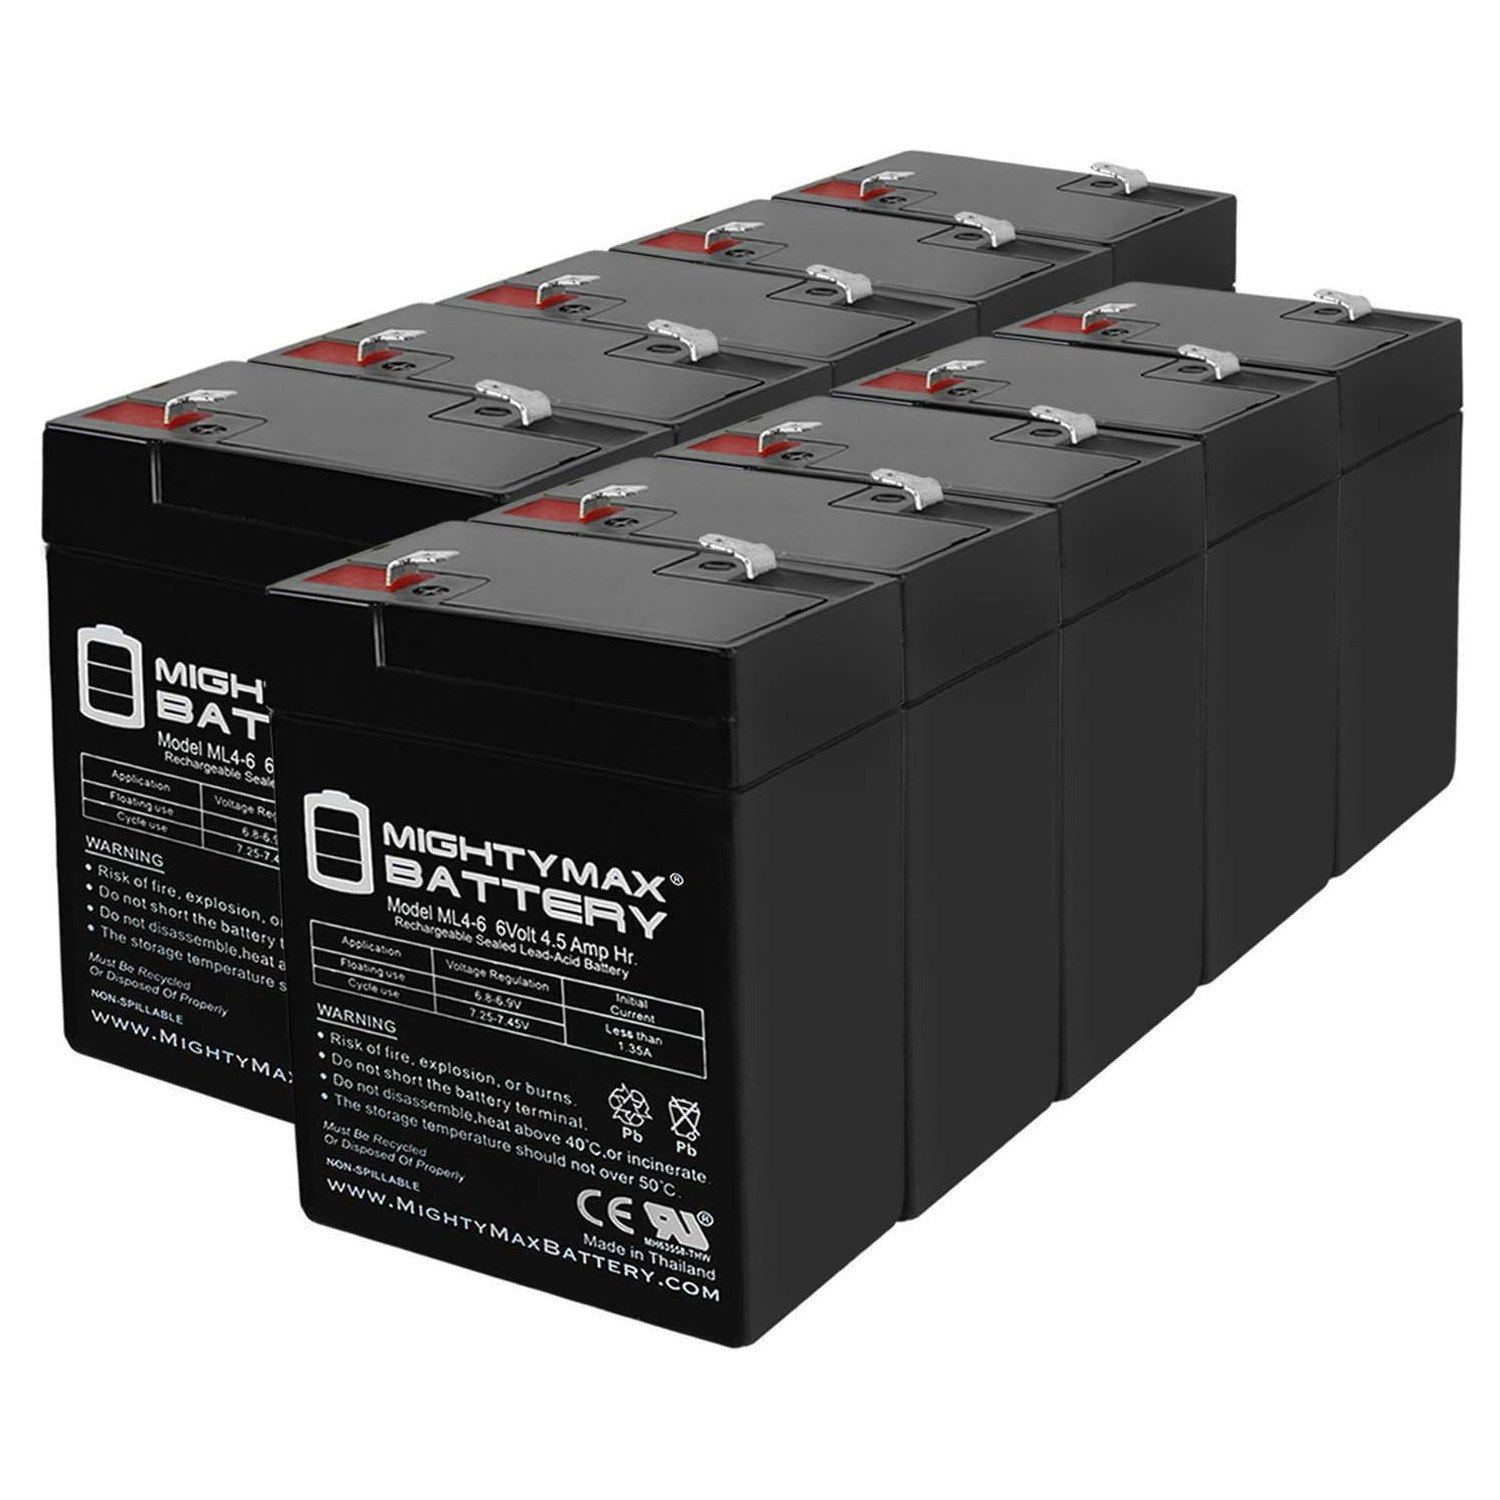 6V 4.5AH SLA Replacement Battery for APC RBK400 - 10 Pack